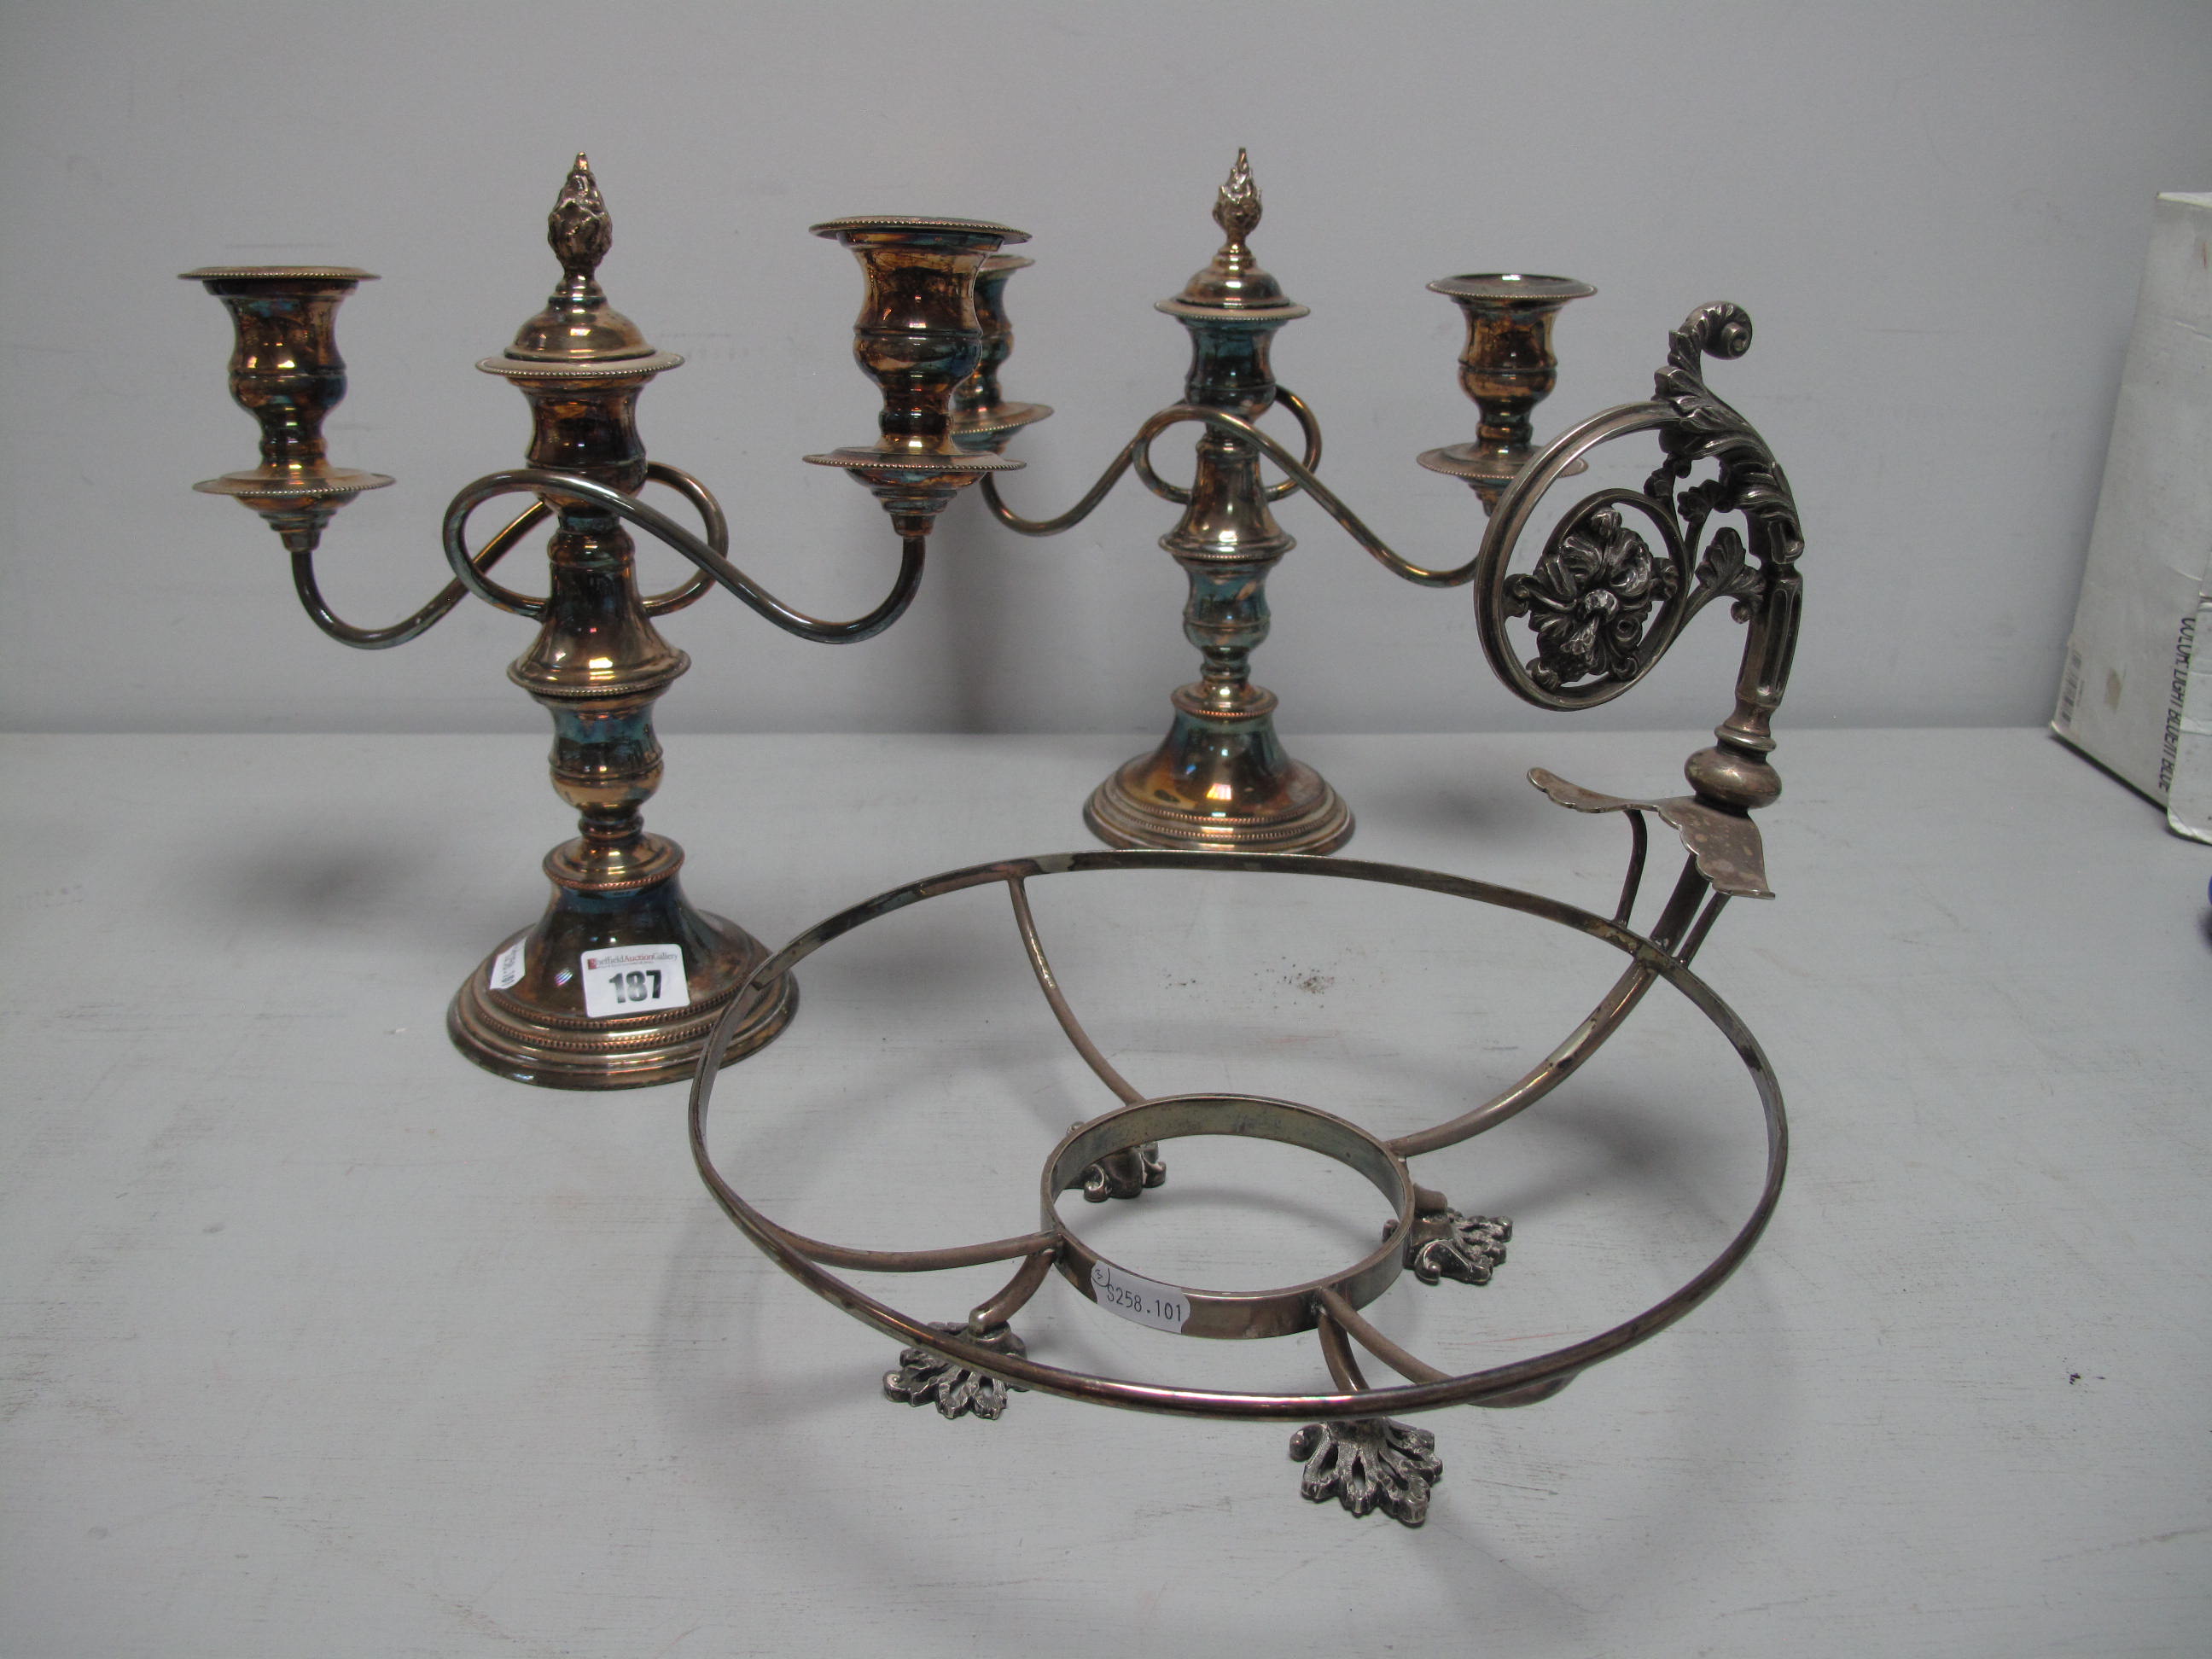 A Pair of Plated Twin Branch Candelabra, (three light converting to a pair of dwarf candlesticks);